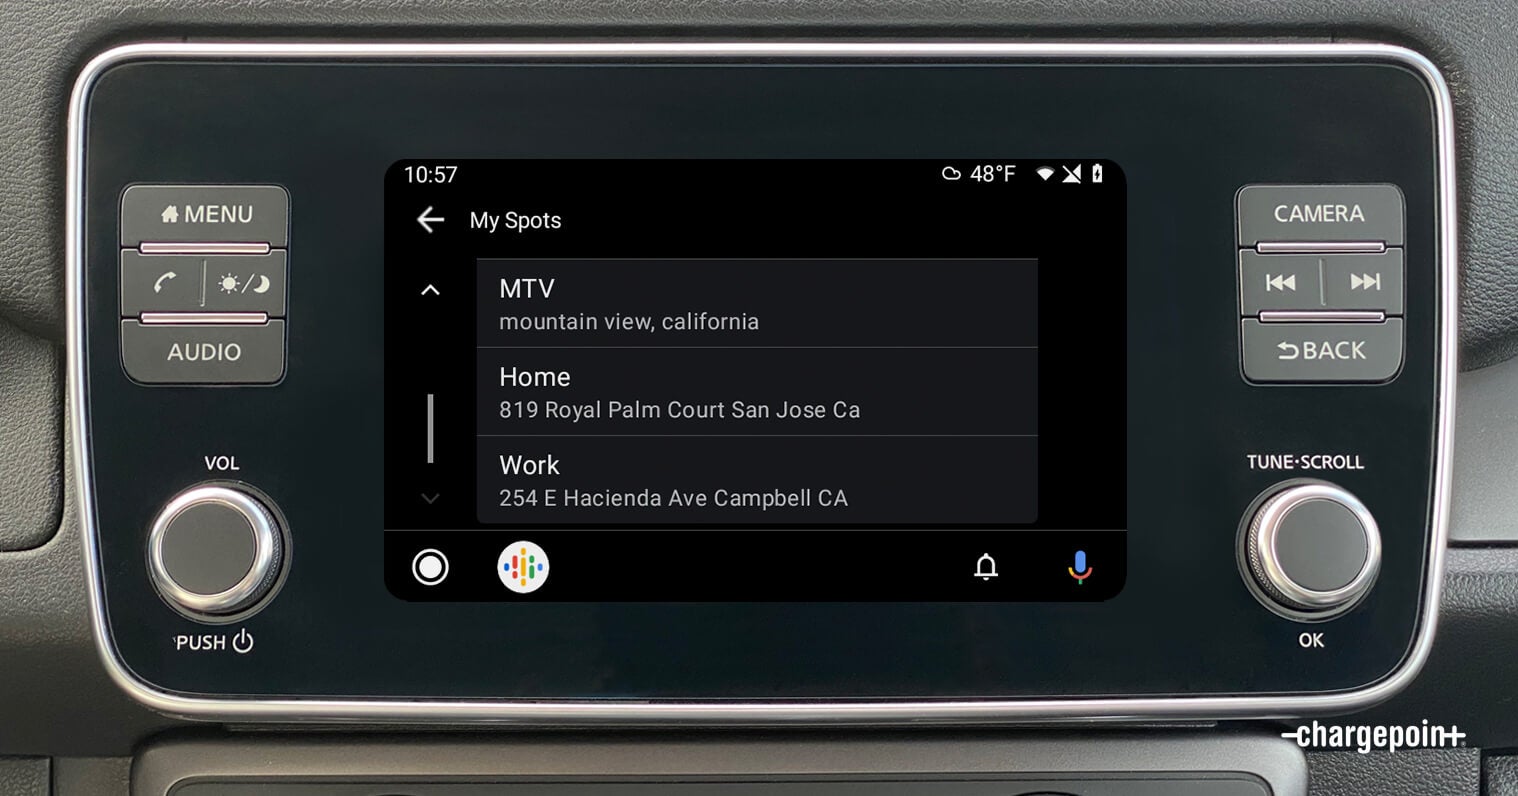 What is Android Auto and how does it work?